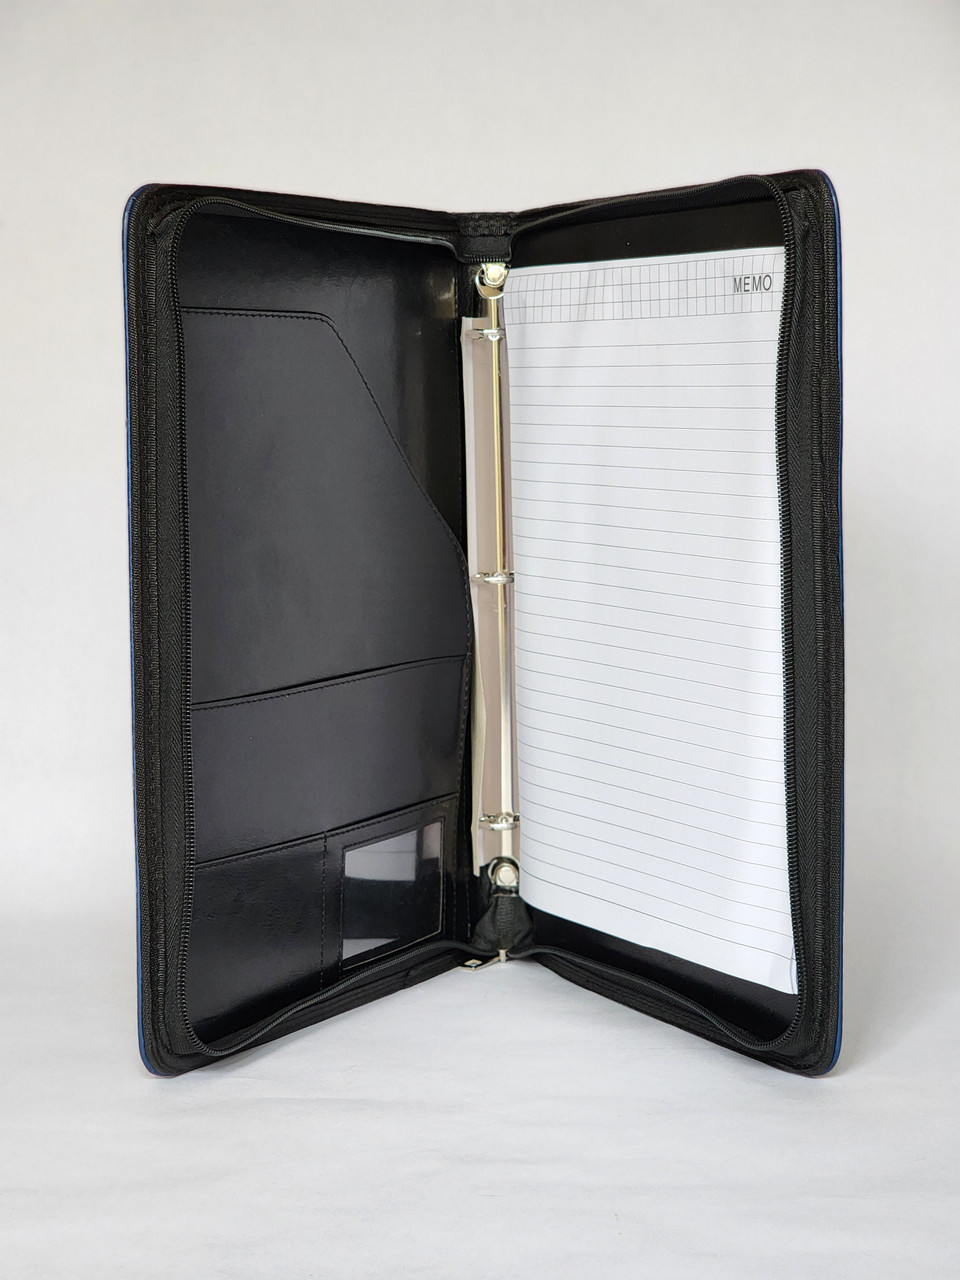 2023 New! PU Leather Journal, 6 Ring Binder Refillable with Pen Holder/DOS  Logo - BKK Inc./ FARA State Department Gifts